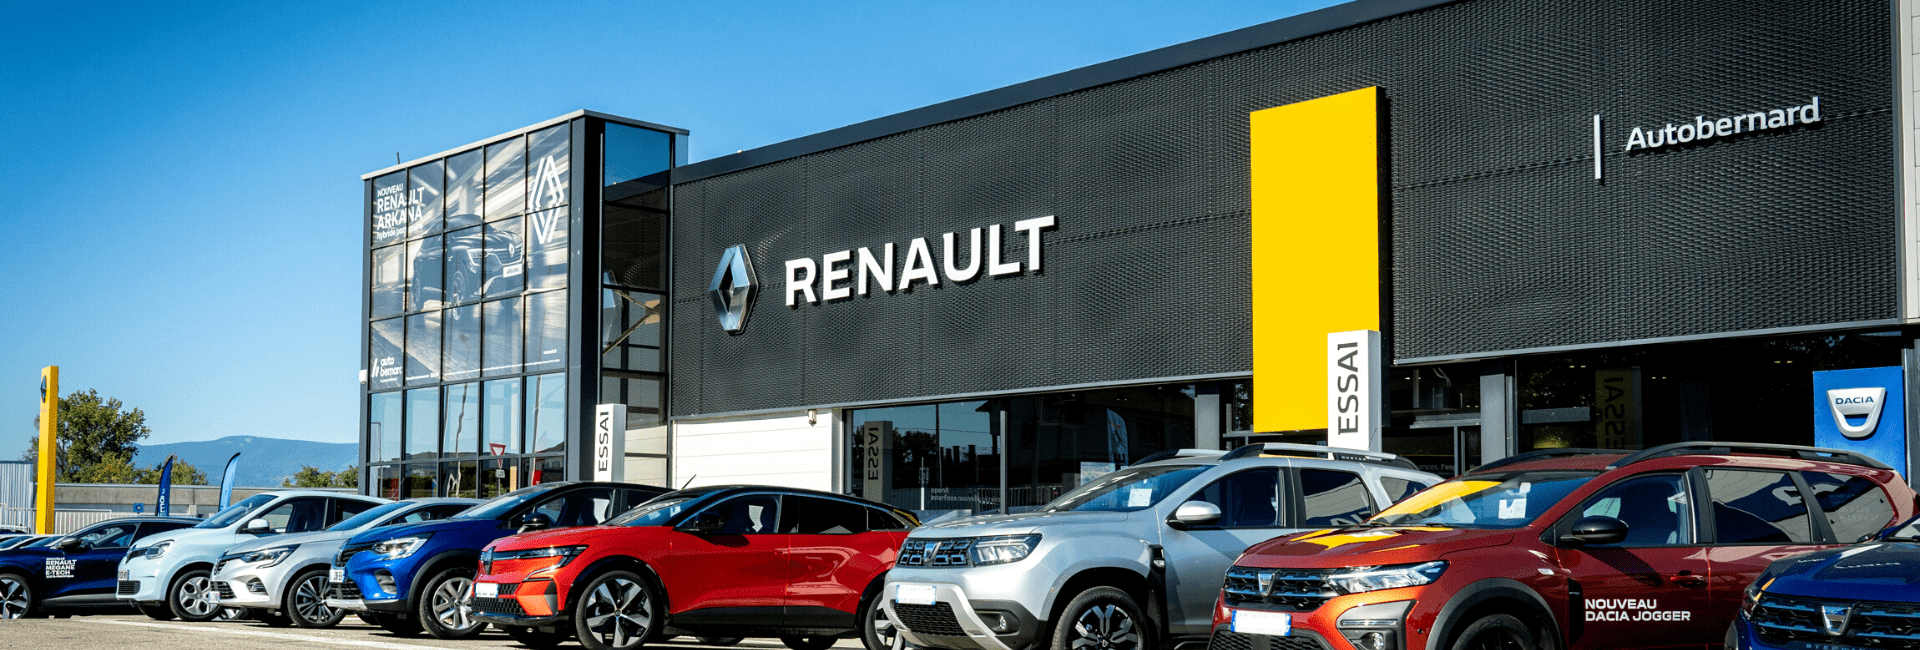 RENAULT ANNONAY